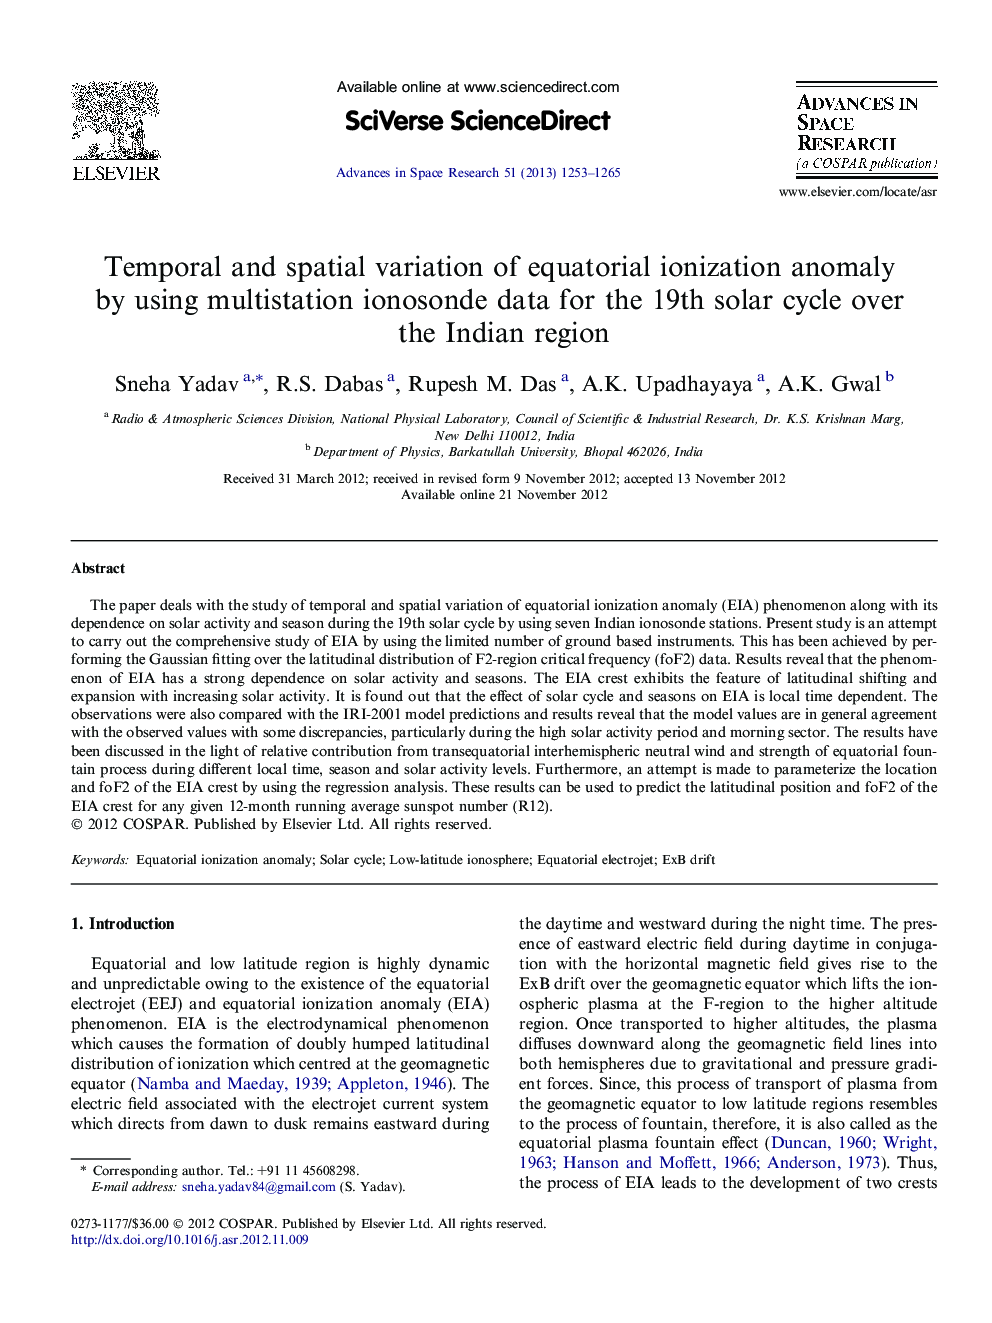 Temporal and spatial variation of equatorial ionization anomaly by using multistation ionosonde data for the 19th solar cycle over the Indian region